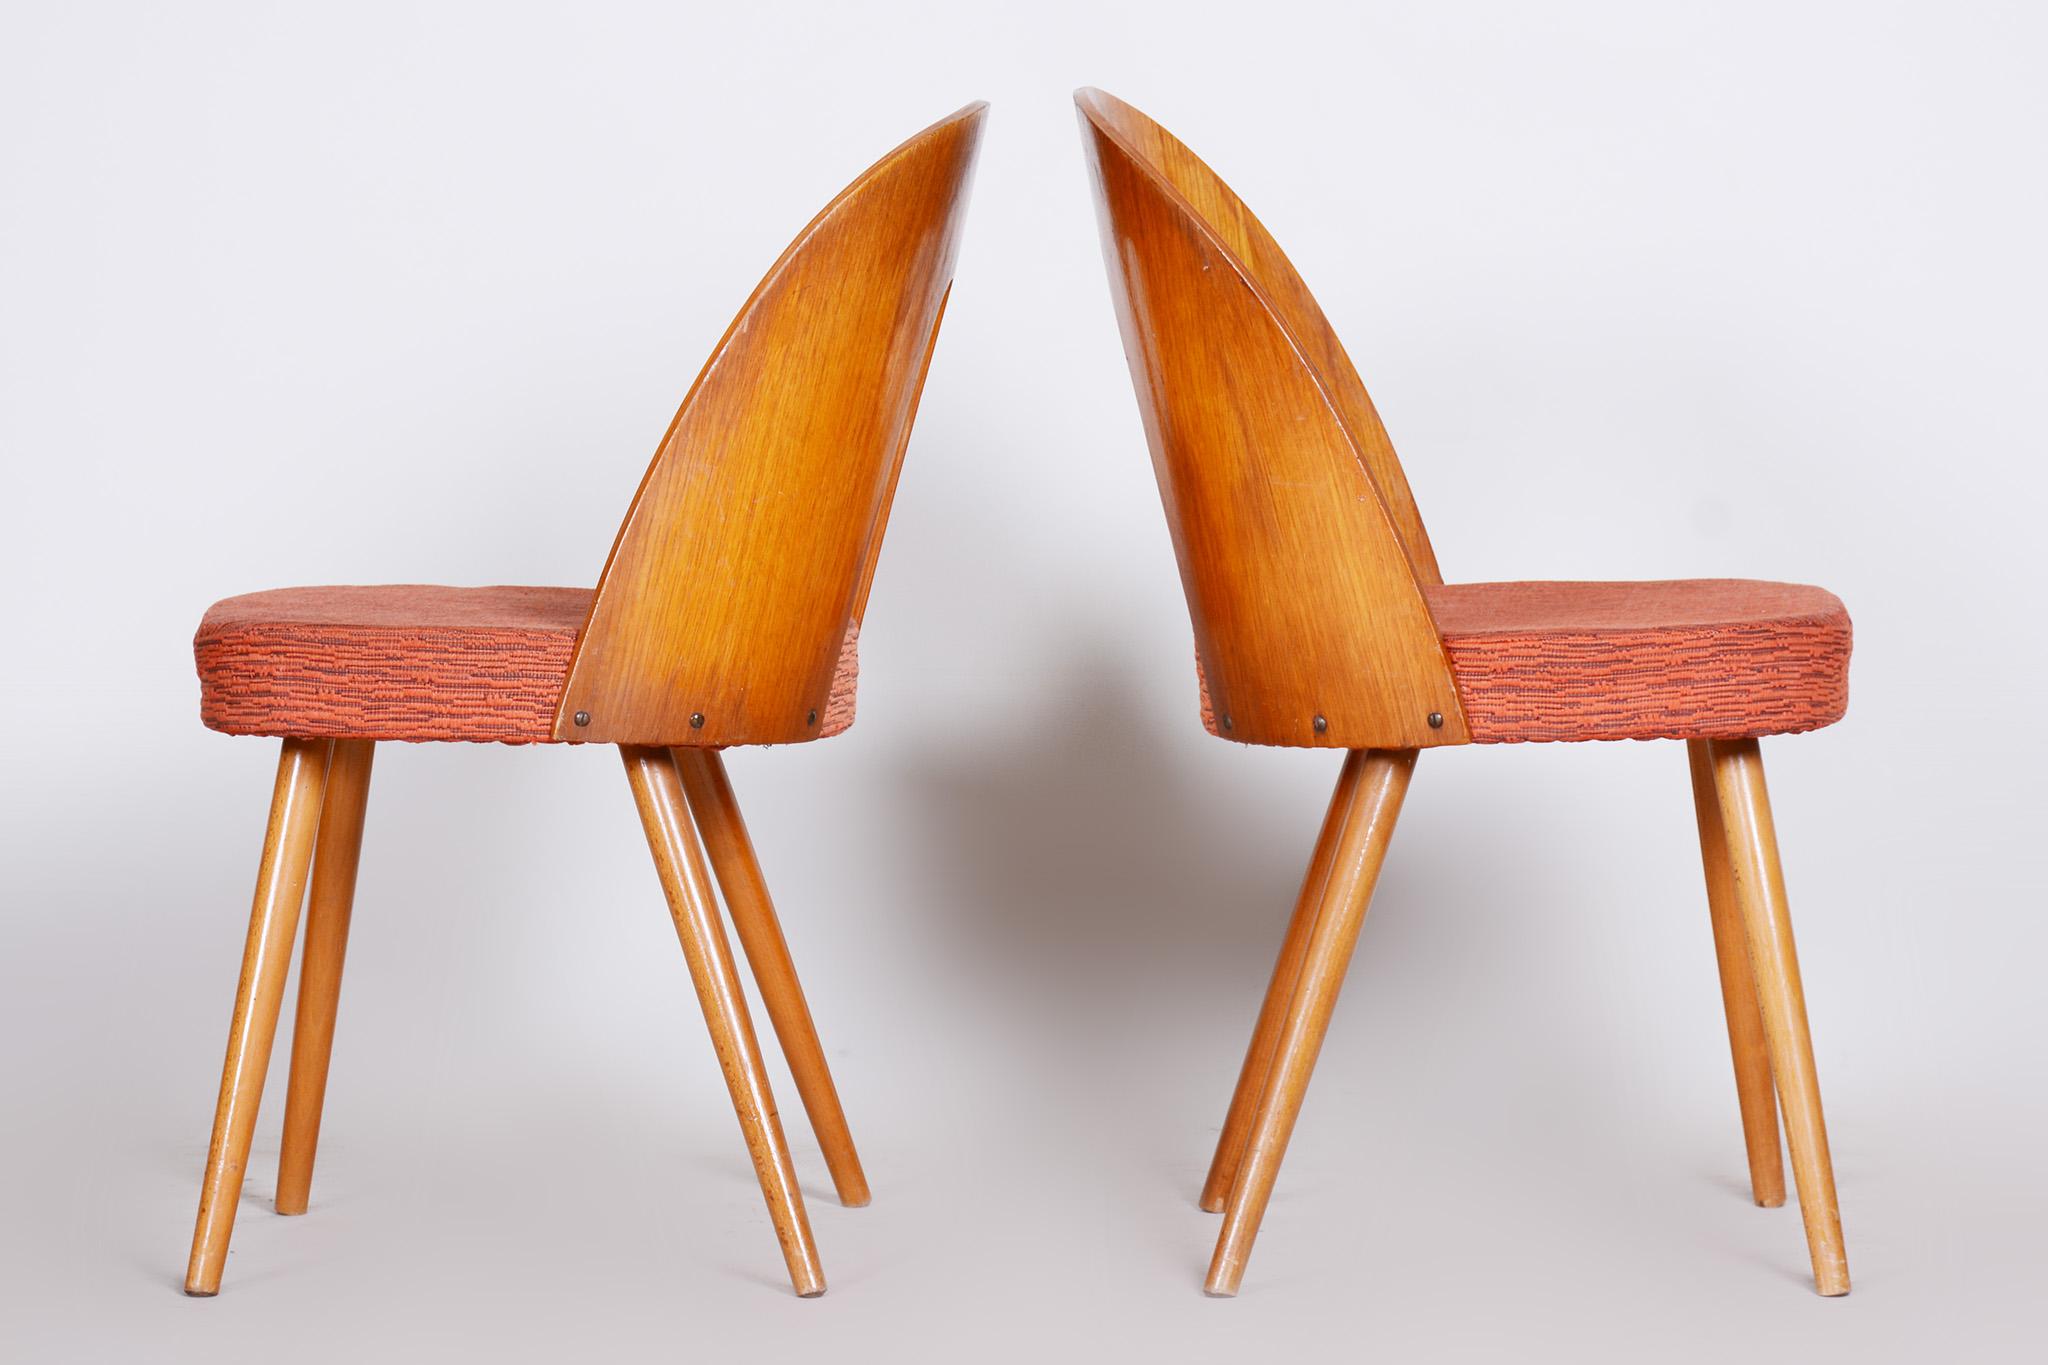 Pair of Mid Century Chairs Made in 1950s Czechia, Designed by Antonín Šuman In Good Condition For Sale In Horomerice, CZ